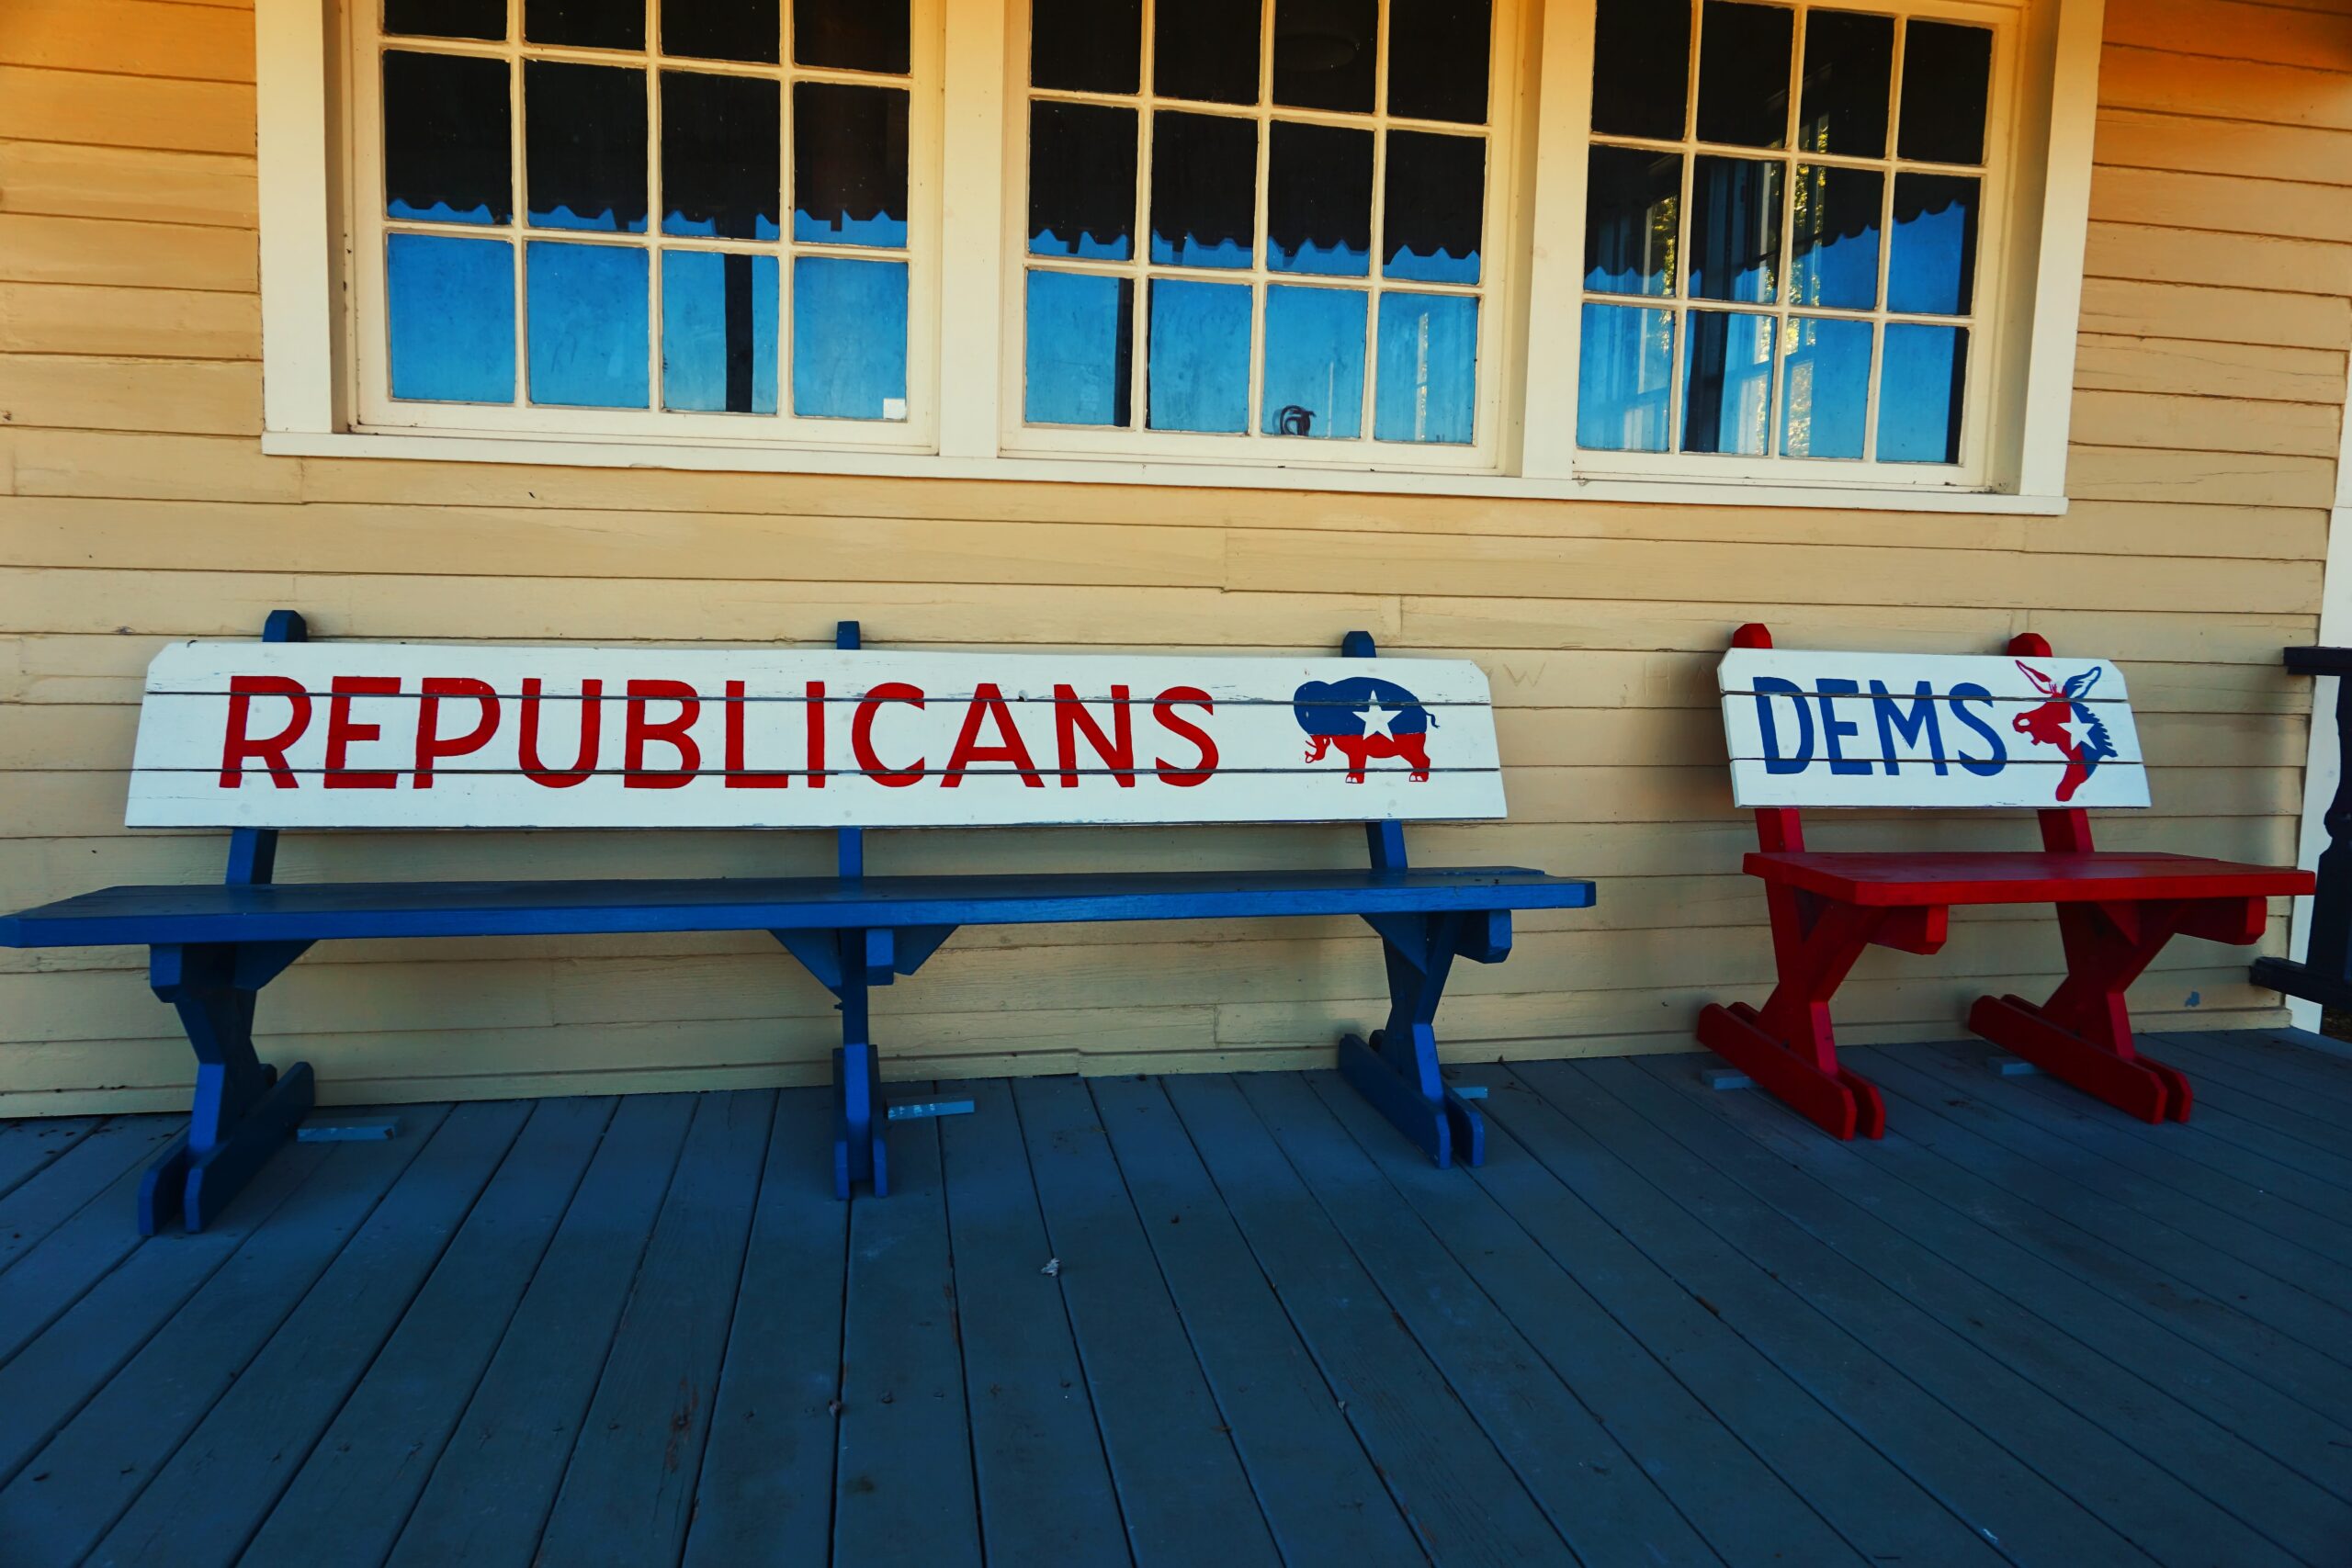 rural town sitting benches outside of voting location reading Republican with Red color and Democrats with blue color.